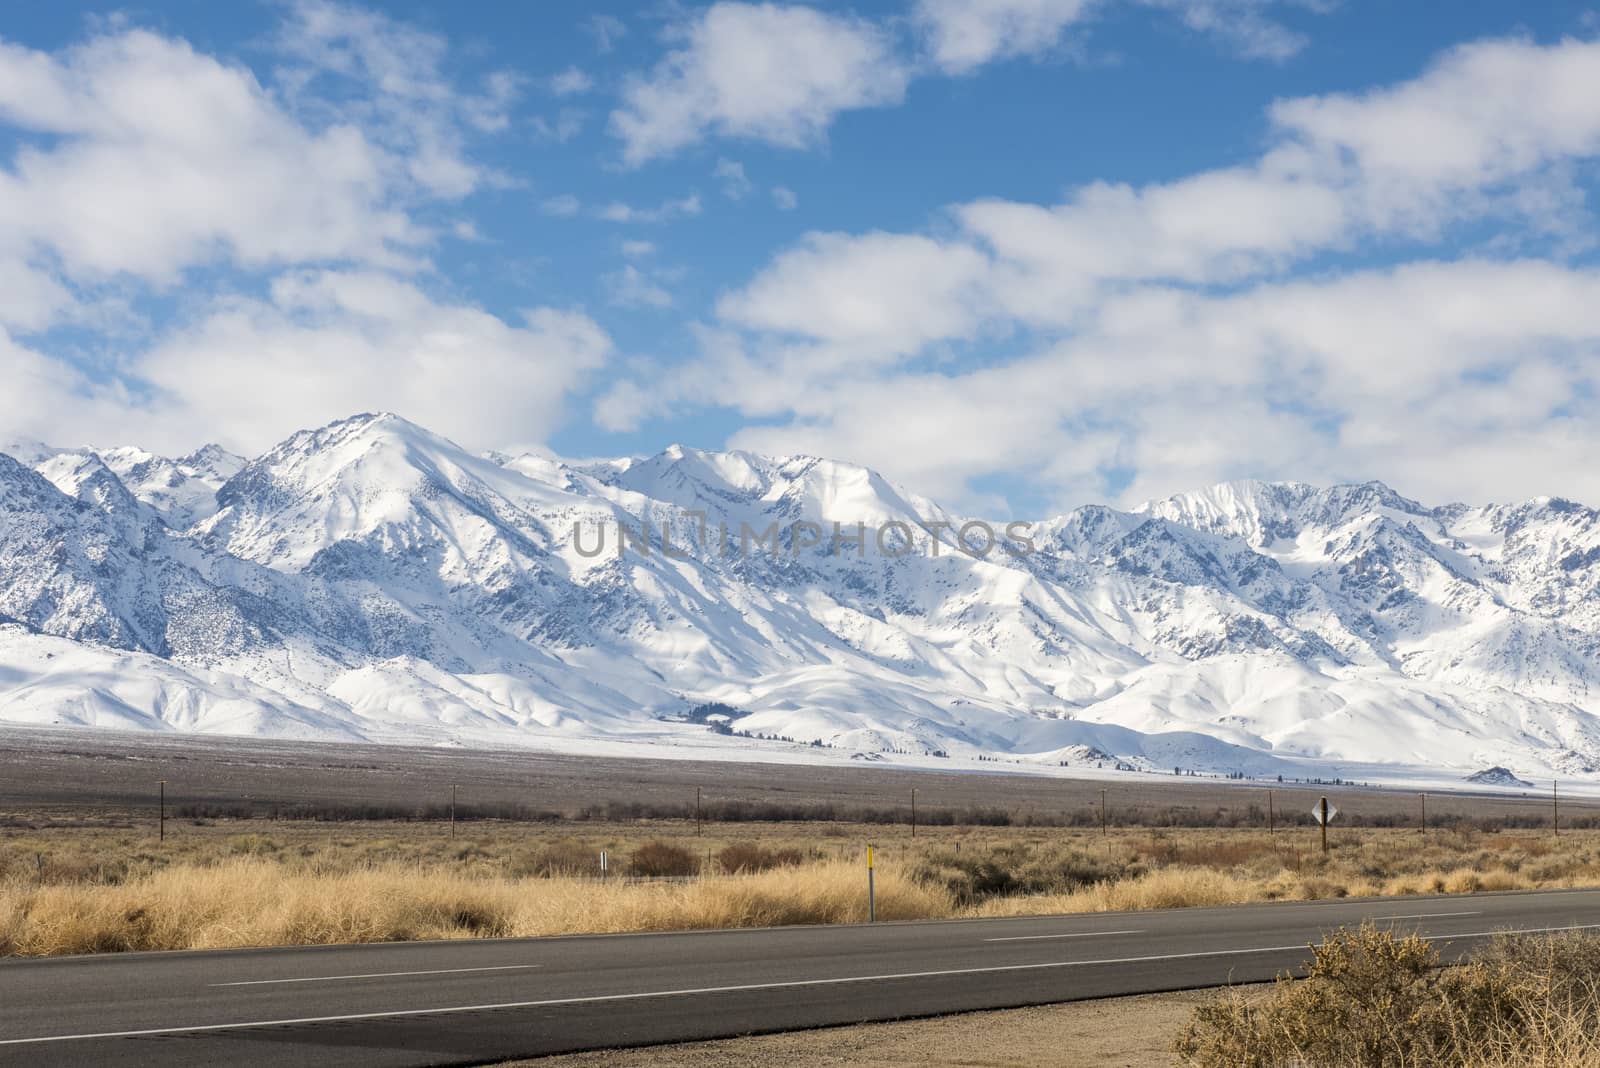 View of the SIerras in winter from highway 395